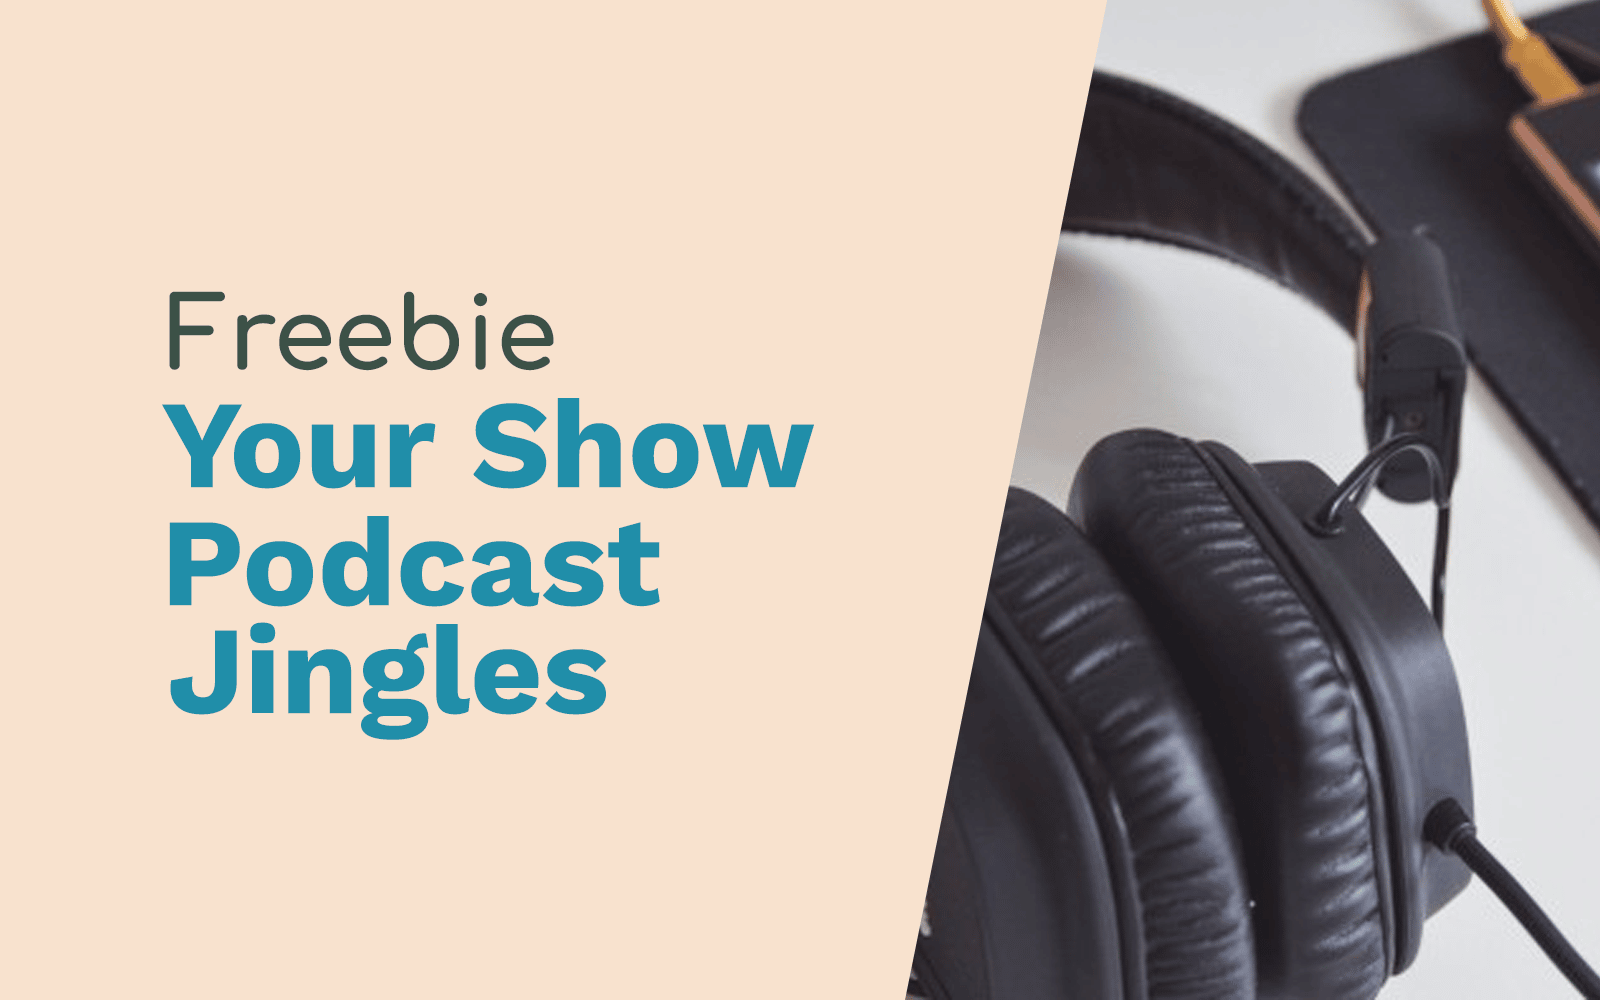 “This Is Your Show” Free Podcast Jingles Free Jingles podcast jingles Music Radio Creative